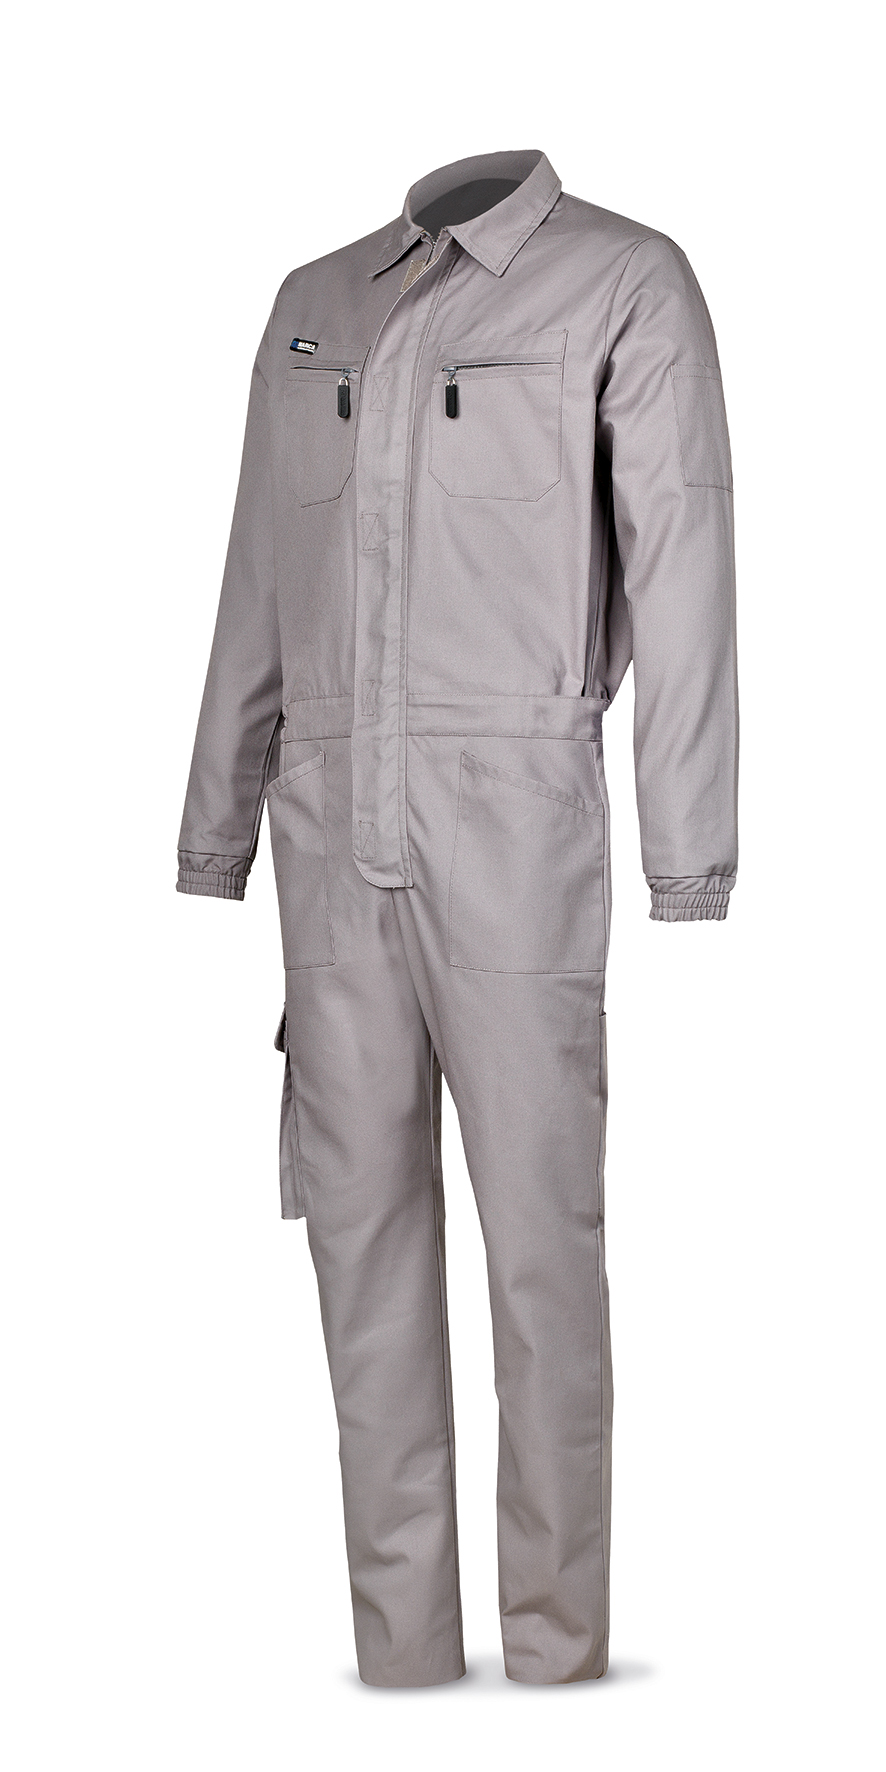 488-BTOPG Workwear Top Series Overall 100% Cotton gray 245 g.